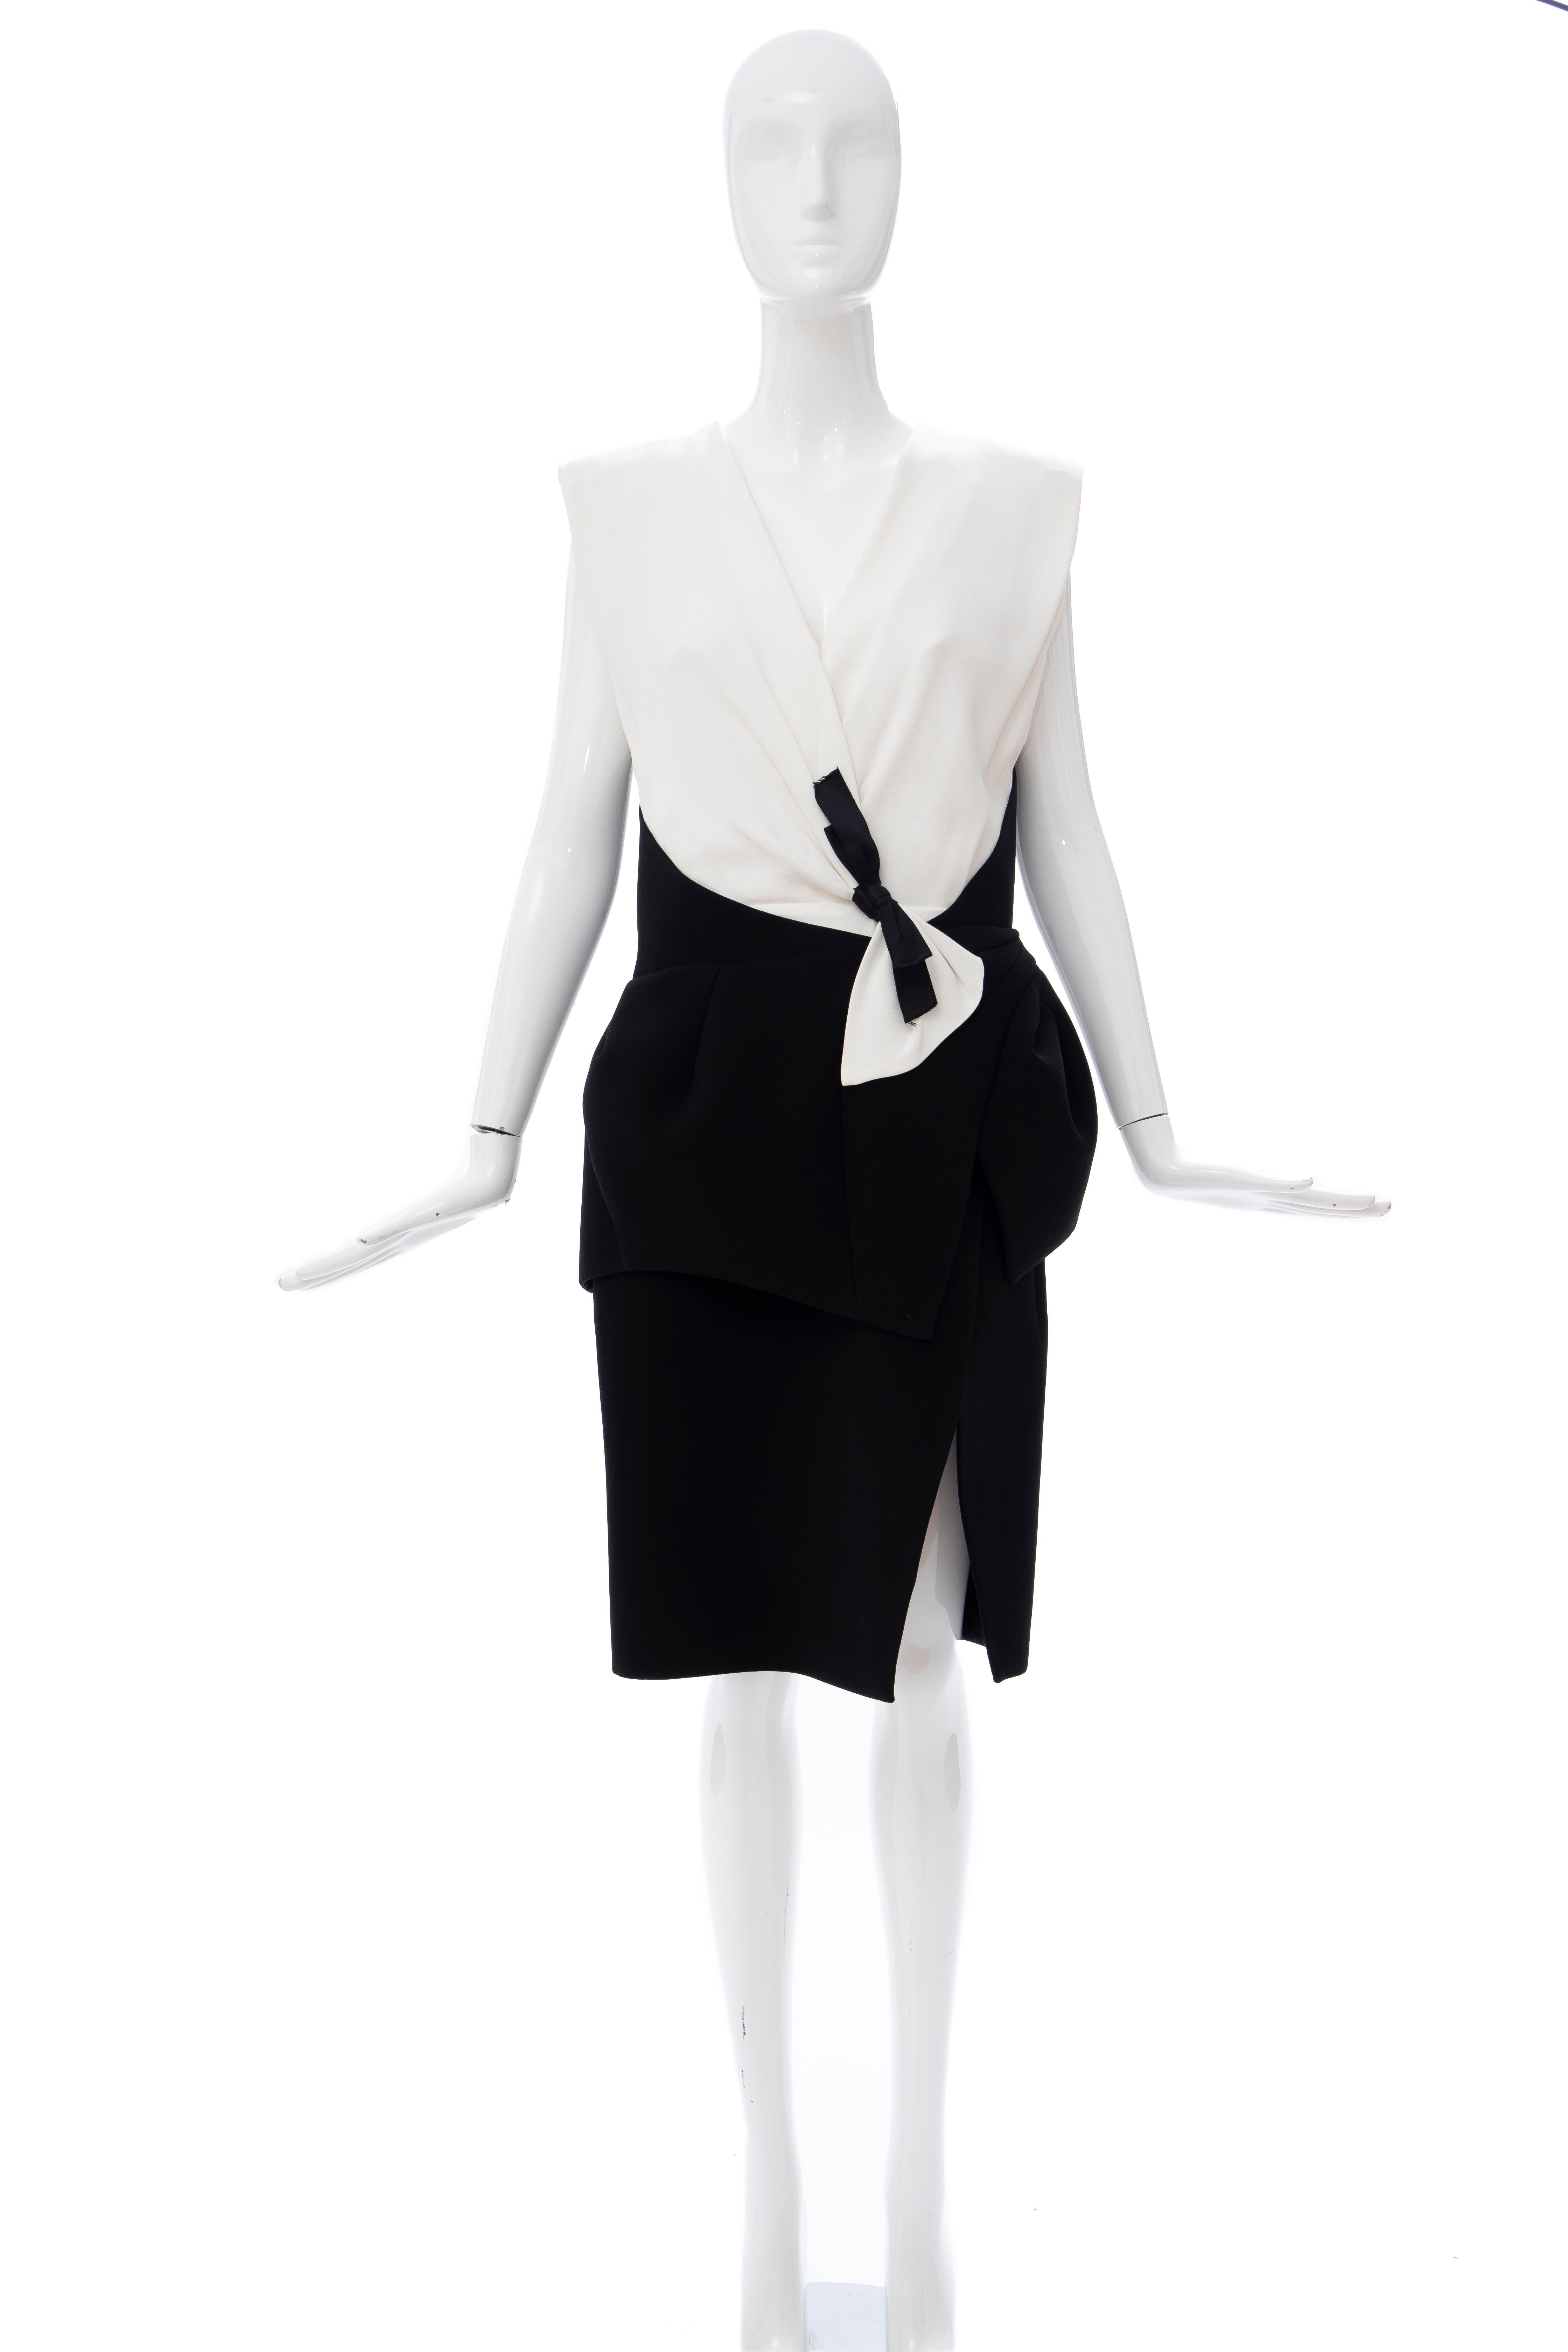 Nicolas Ghesquière for Balenciaga Runway Fall 2008 black and white color block dress with structured shoulders, bow accent at waist, concealed zip closure at back and built-in bra.

FR. 42, US. 10

Bust: 32, Waist: 31, Hip: 36, Length: 40

Fabric: